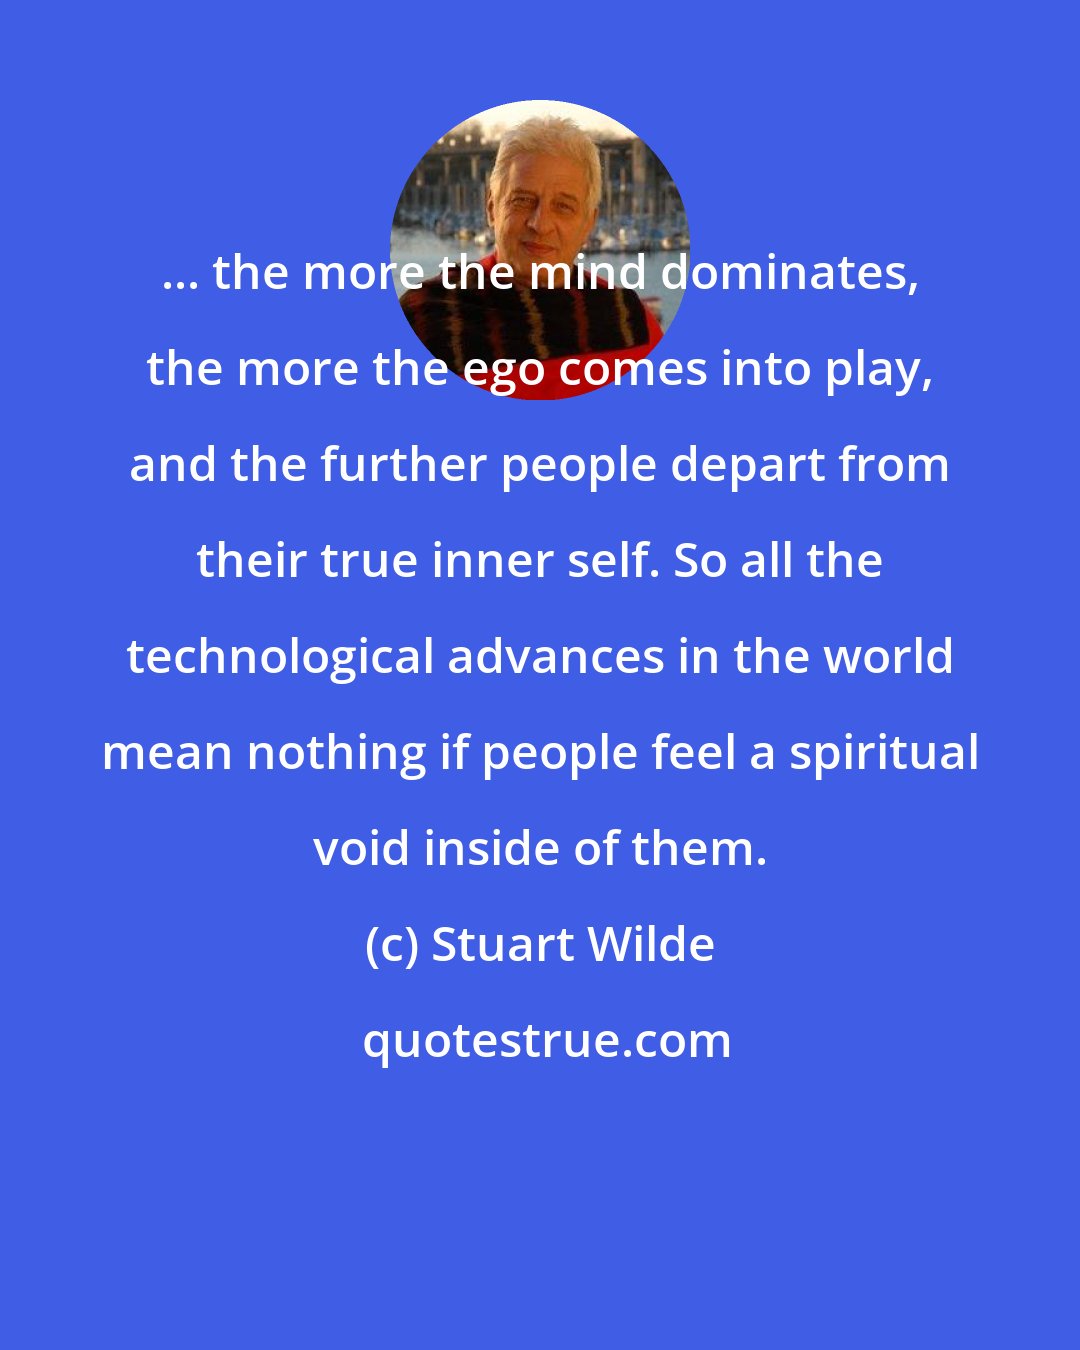 Stuart Wilde: ... the more the mind dominates, the more the ego comes into play, and the further people depart from their true inner self. So all the technological advances in the world mean nothing if people feel a spiritual void inside of them.